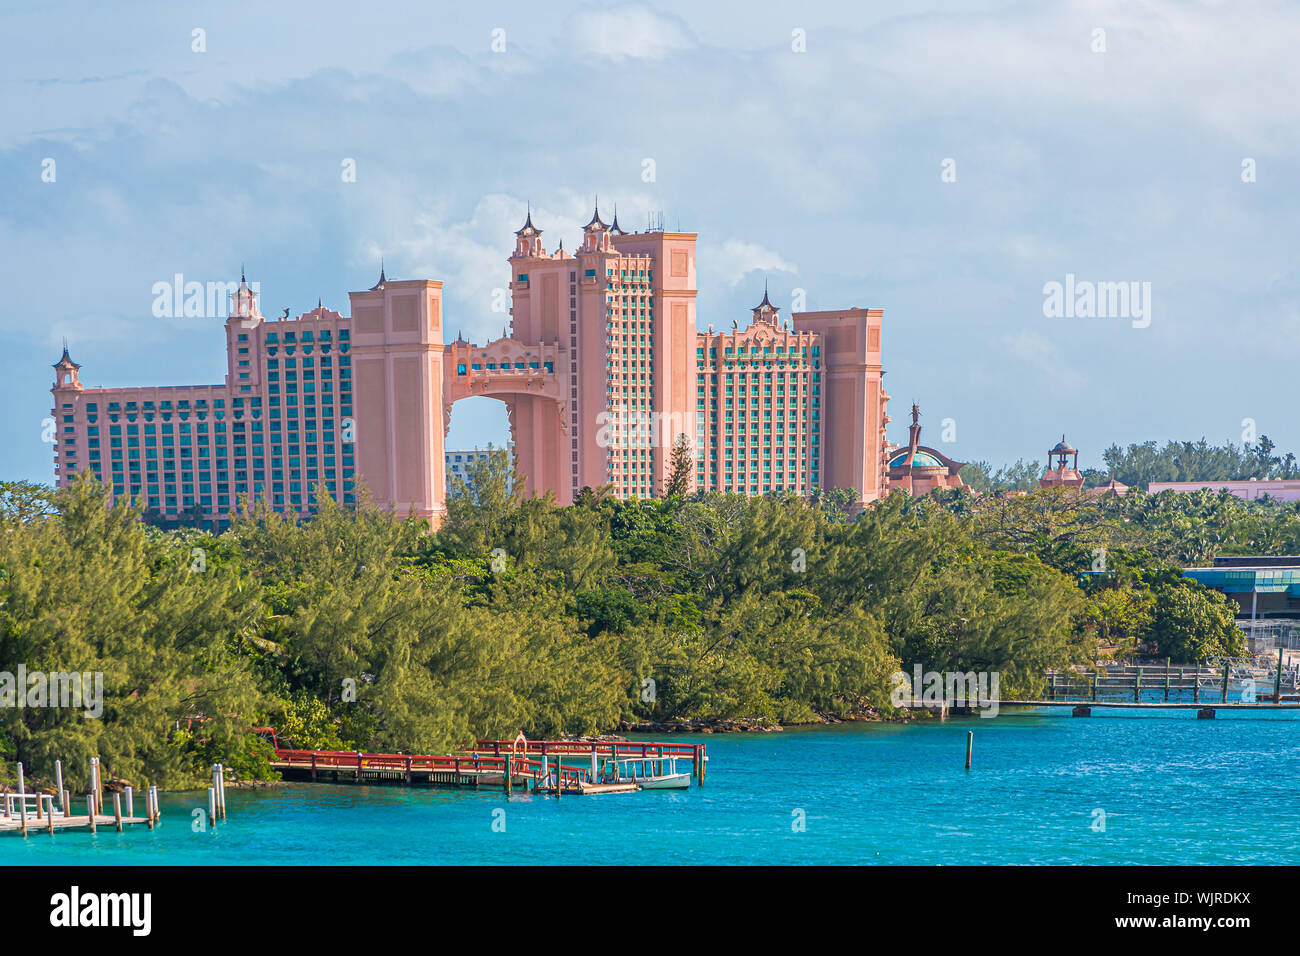 NASSAU, BAHAMAS - September 2, 2019: Nassau and the Bahamas was pounded by endless rain and 185 mph winds from Category 5 Dorian, which stayed station Stock Photo